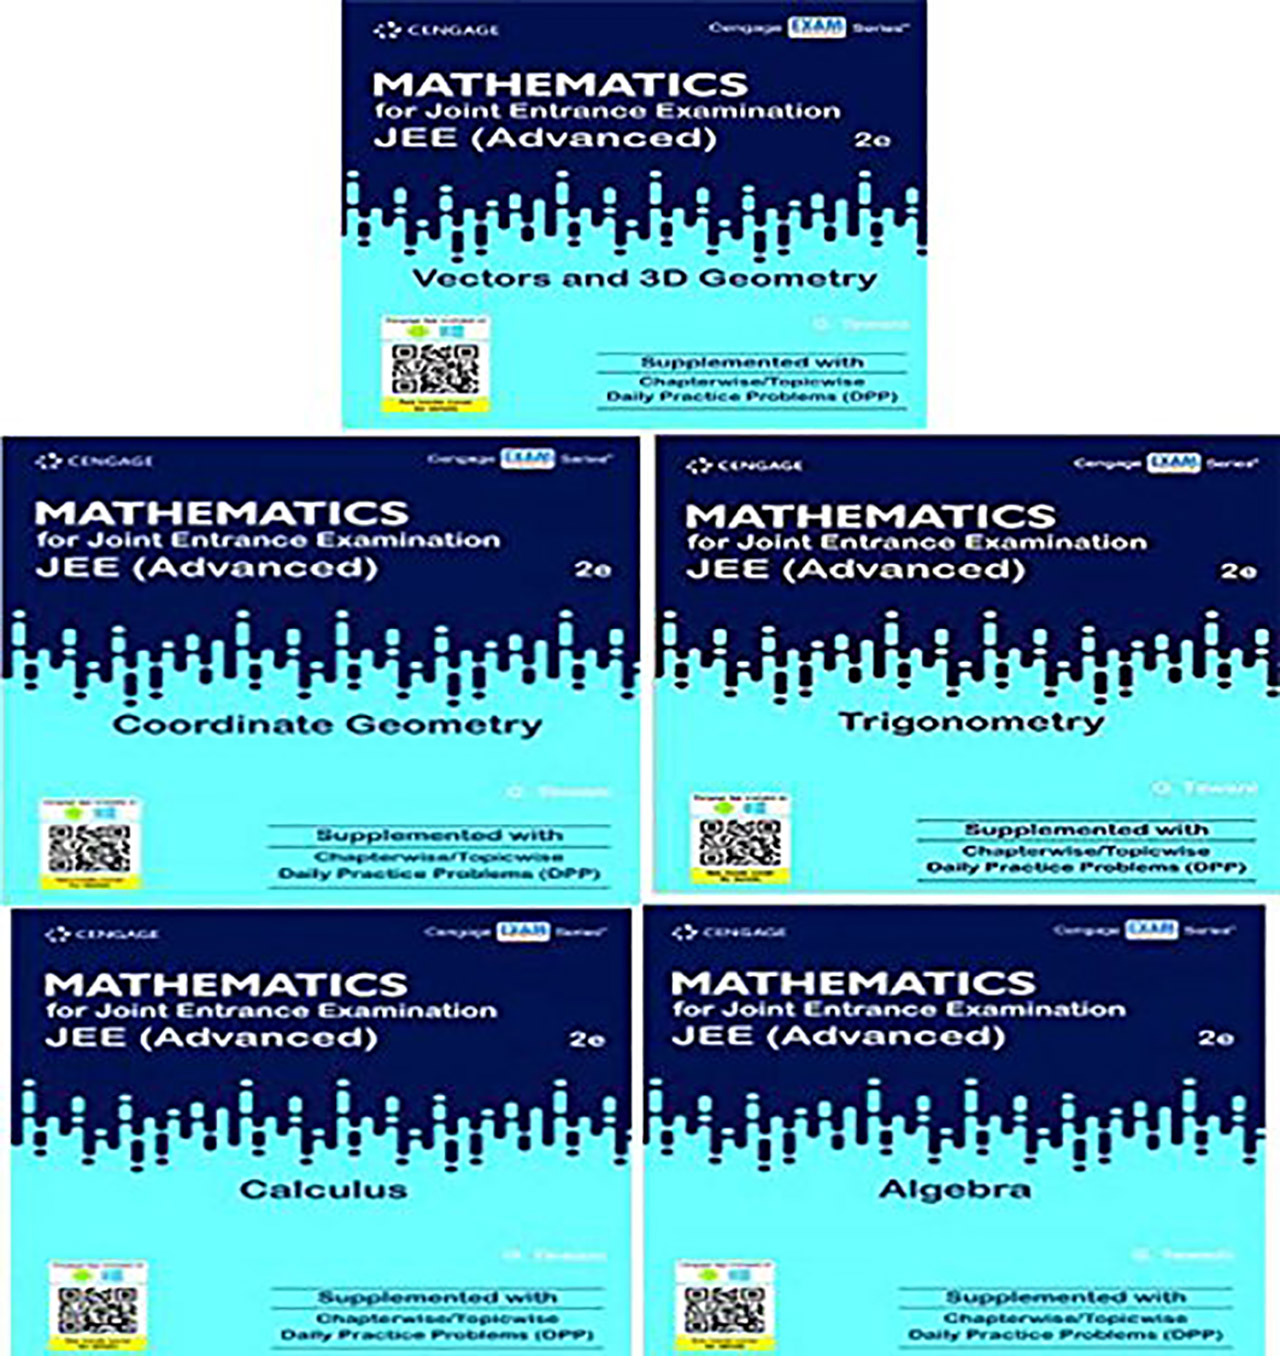 all-cengage-in-one-mathematics-cengage-publication-book-from-ConceptsMadeEasy.com